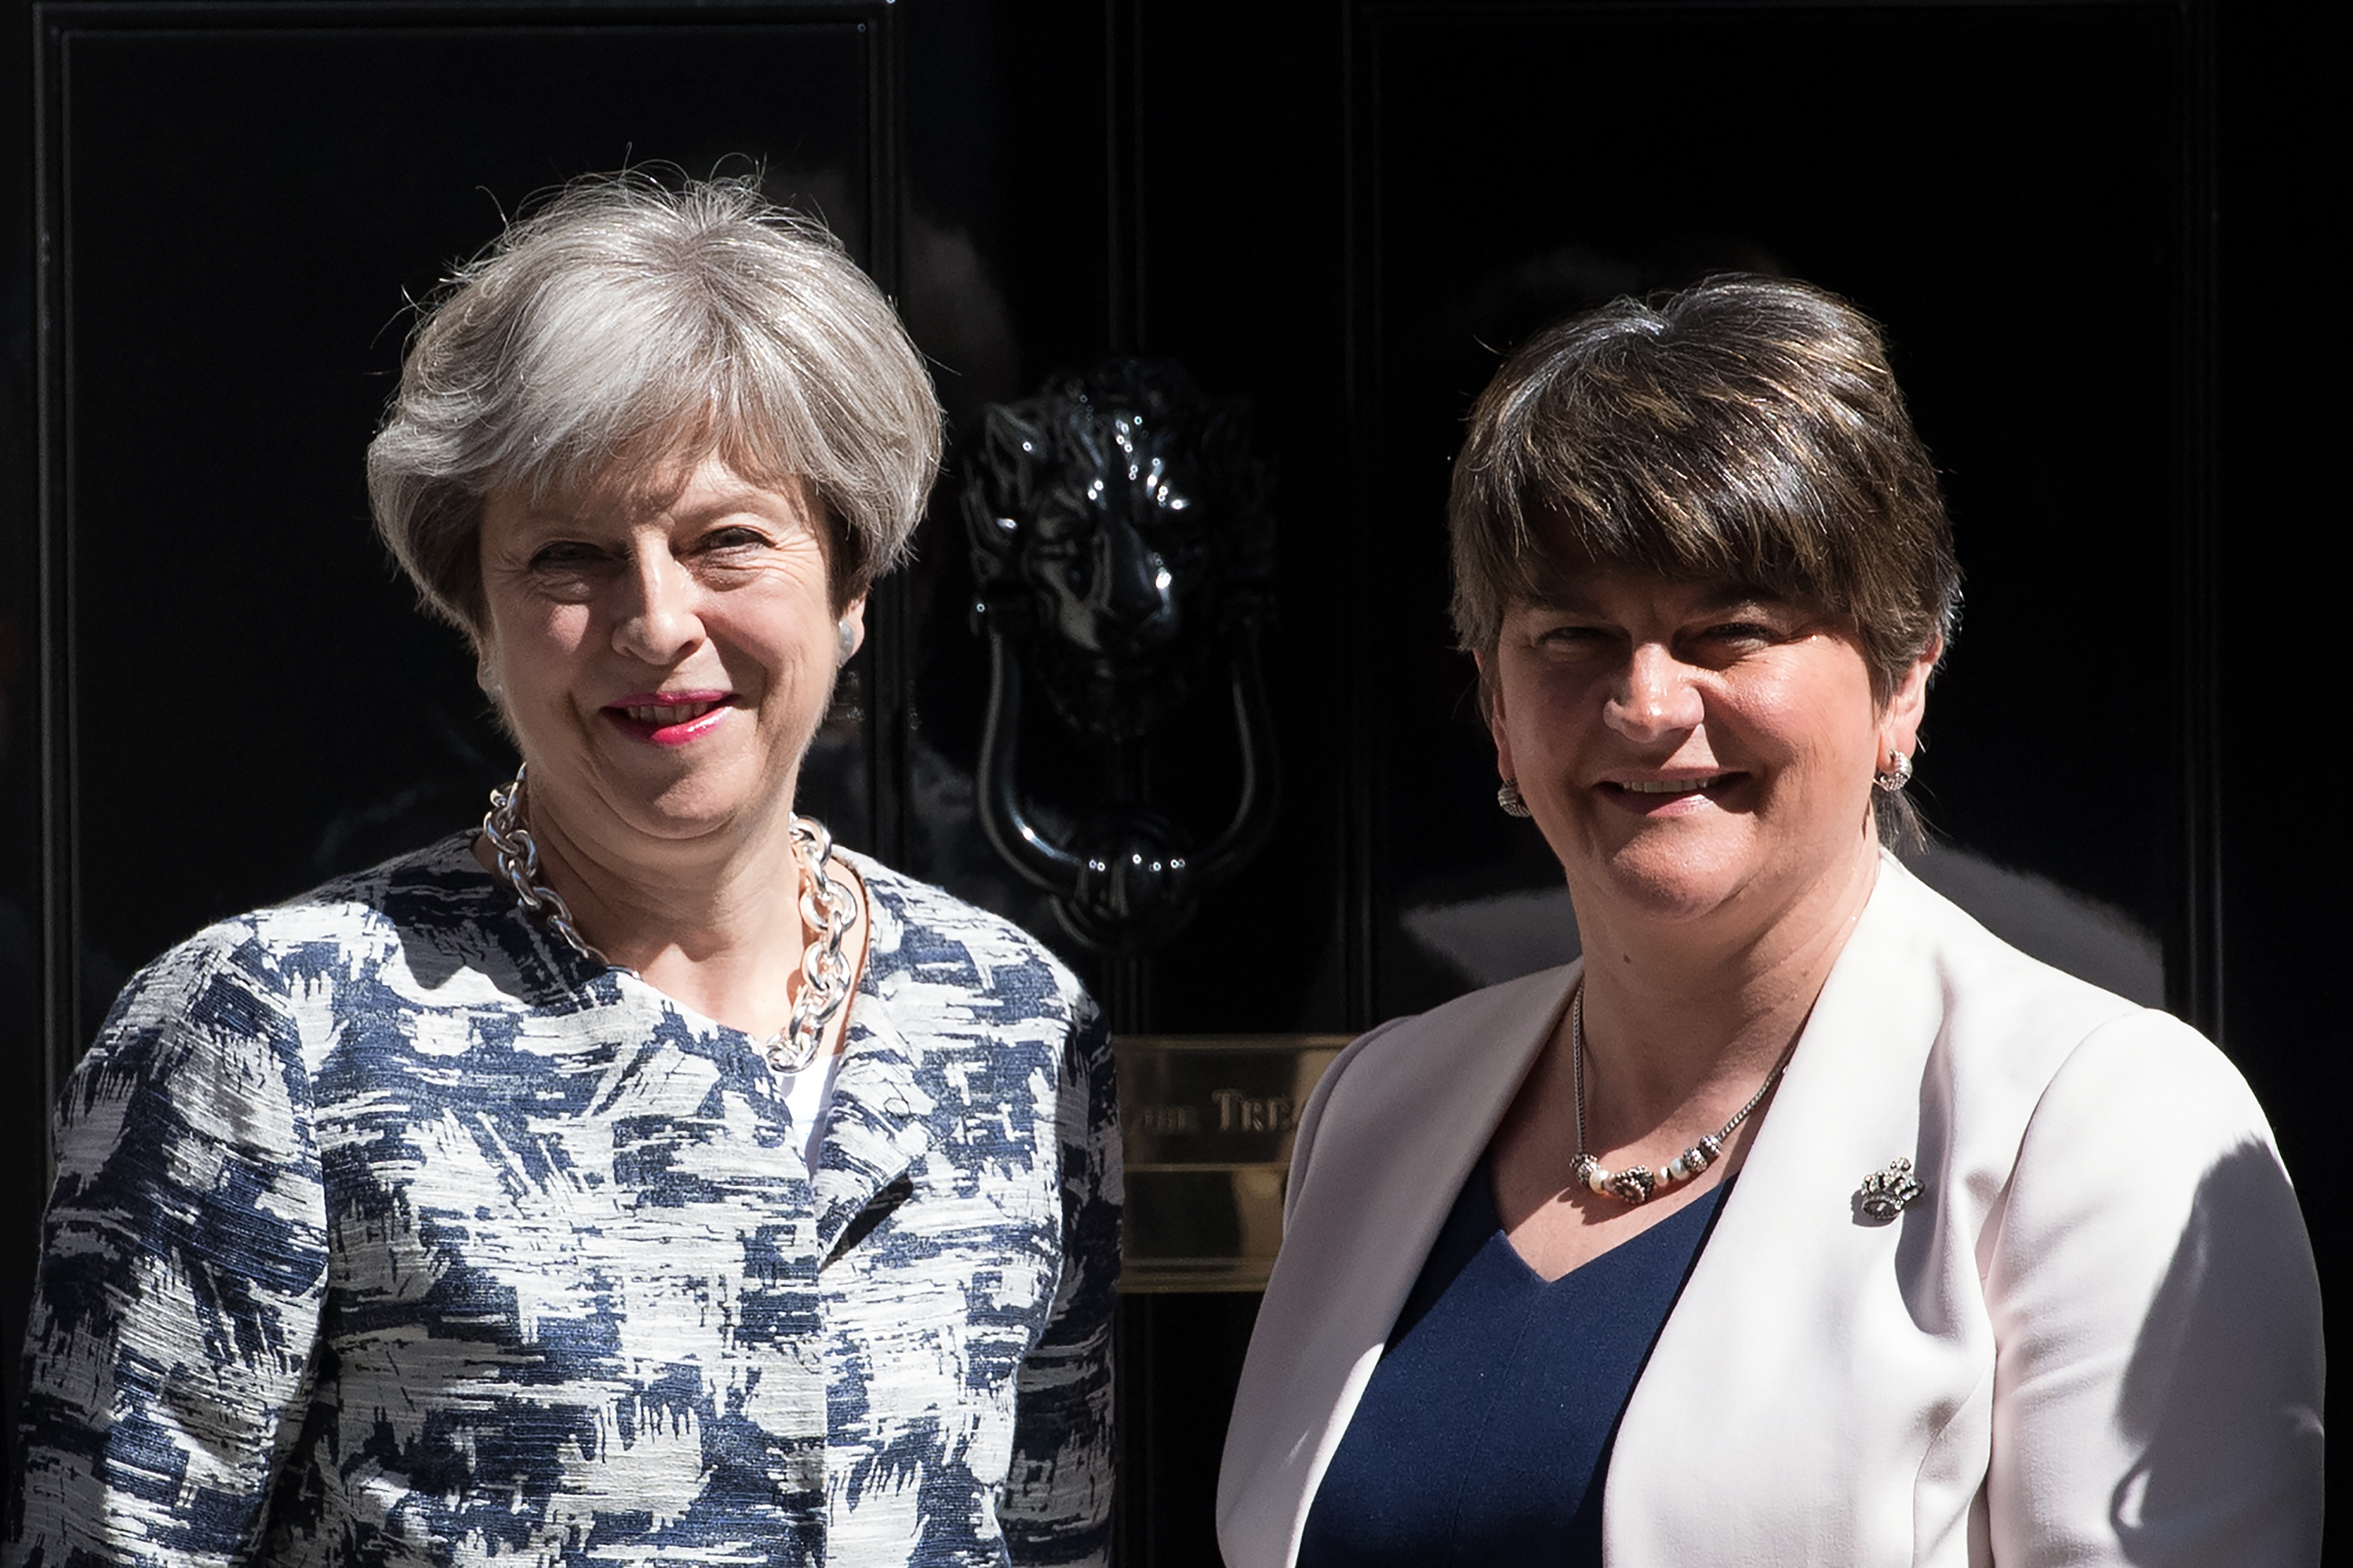 Britain's Prime Minister, Theresa May (L), greets Arlene Foster, the leader of Northern Ireland's Democratic Unionist Party in Downing Street on June 26, 2017 in London, England. (Carl Court—Getty Images)